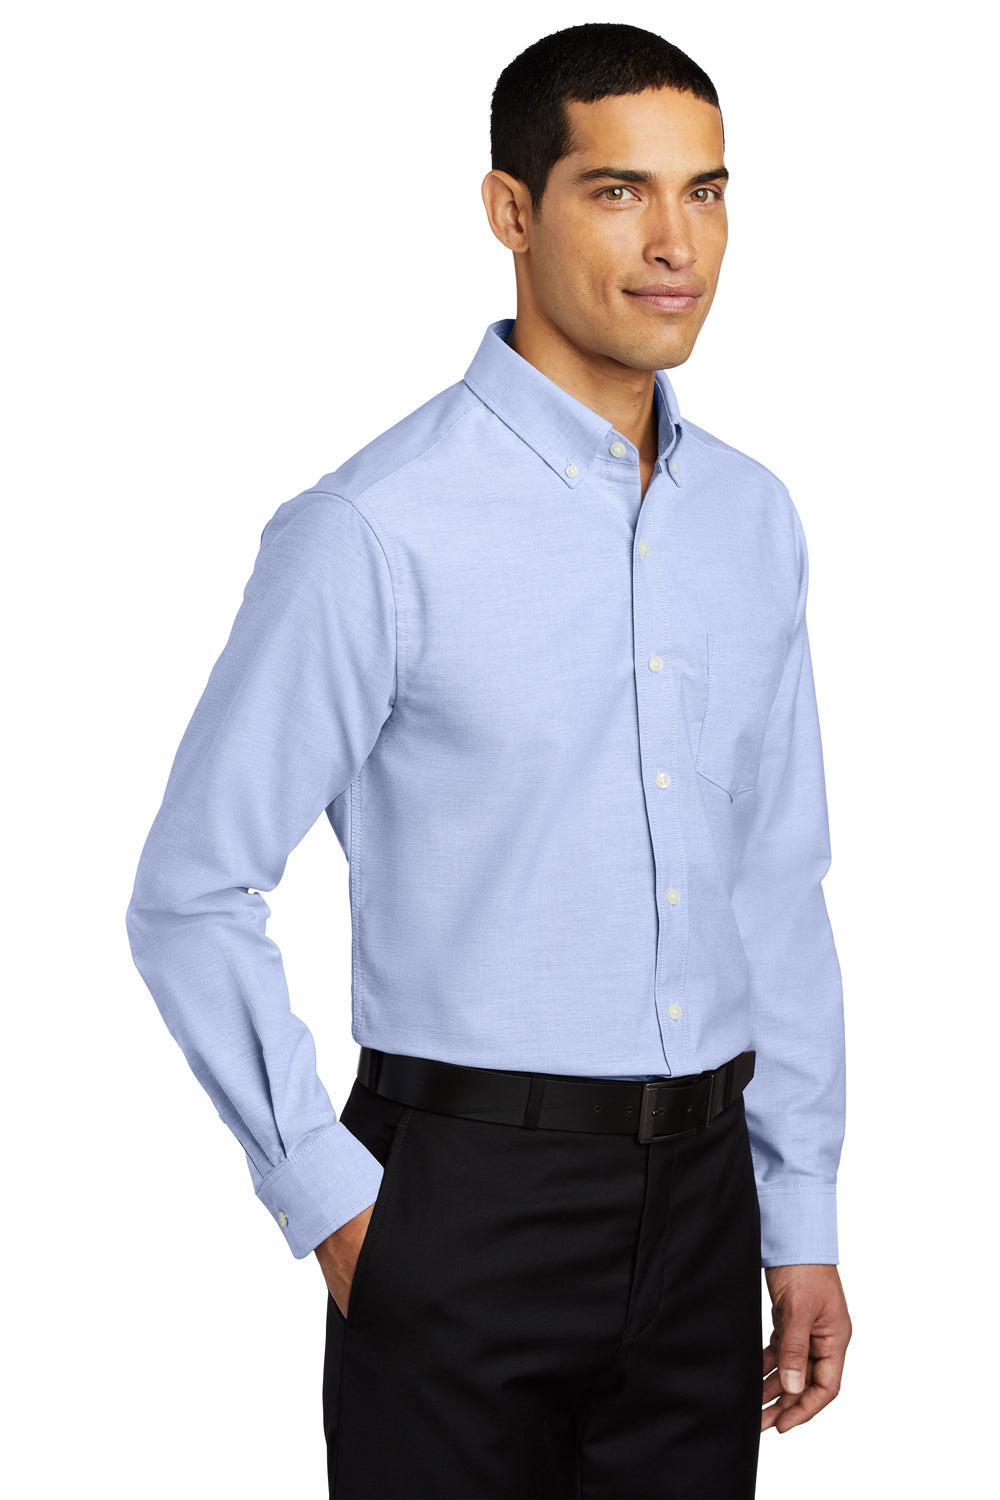 Port Authority S658/TS658 SuperPro Oxford Wrinkle Resistant Long Sleeve Button Down Shirt w/ Pocket Oxford Blue 3Q